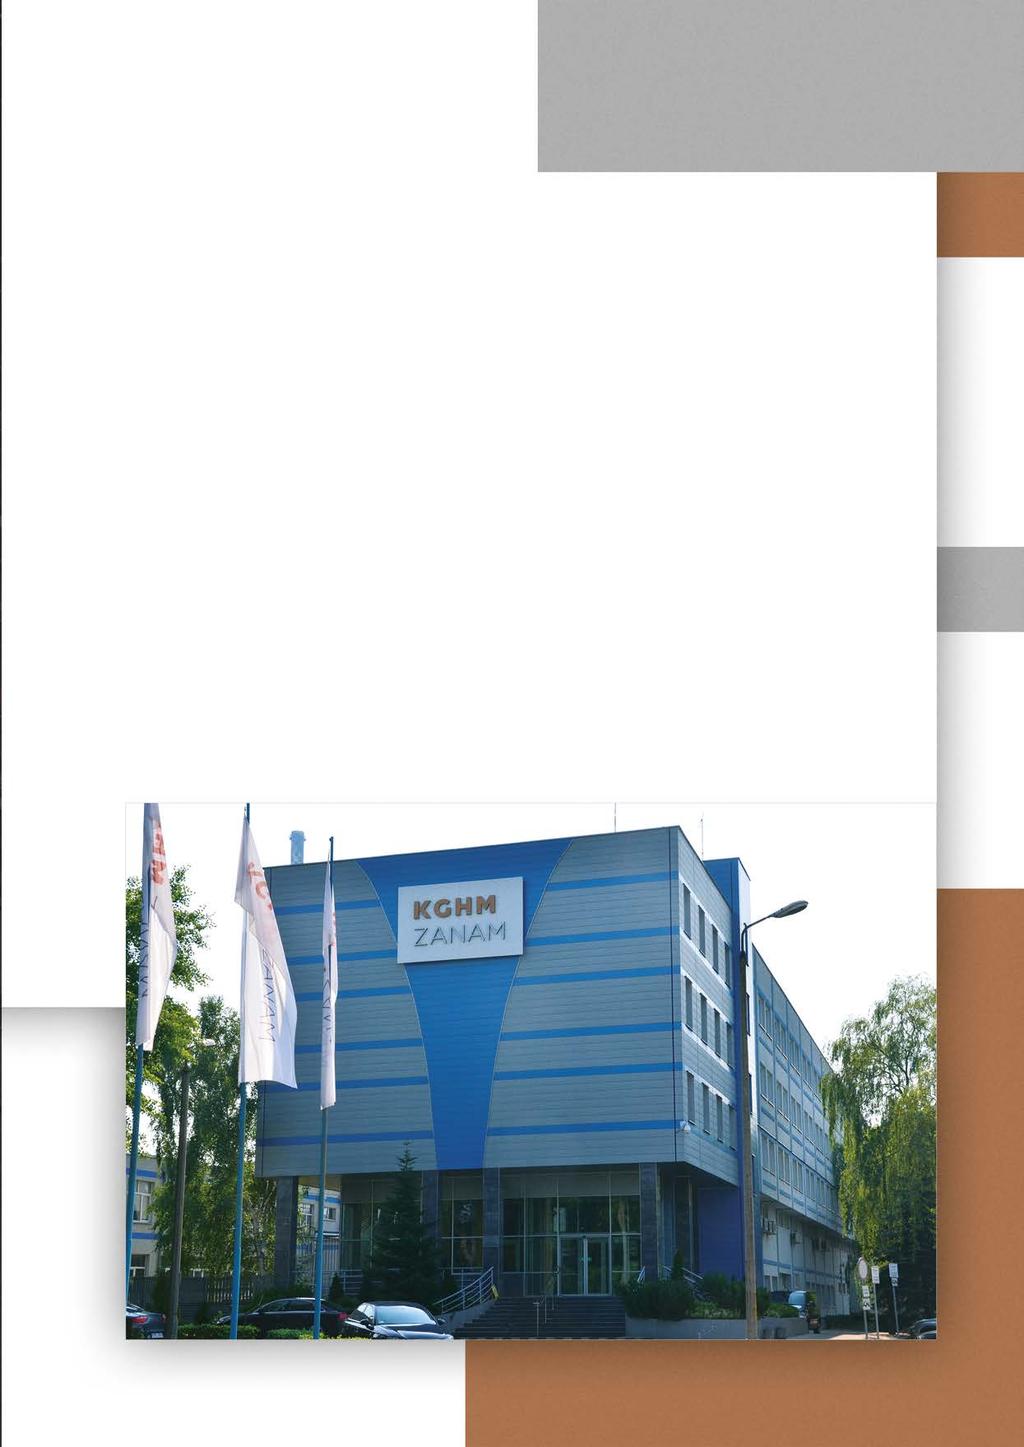 KGHM ZANAM S.A. is one of the largest Polish producers of machinery and equipment for the mining sector.